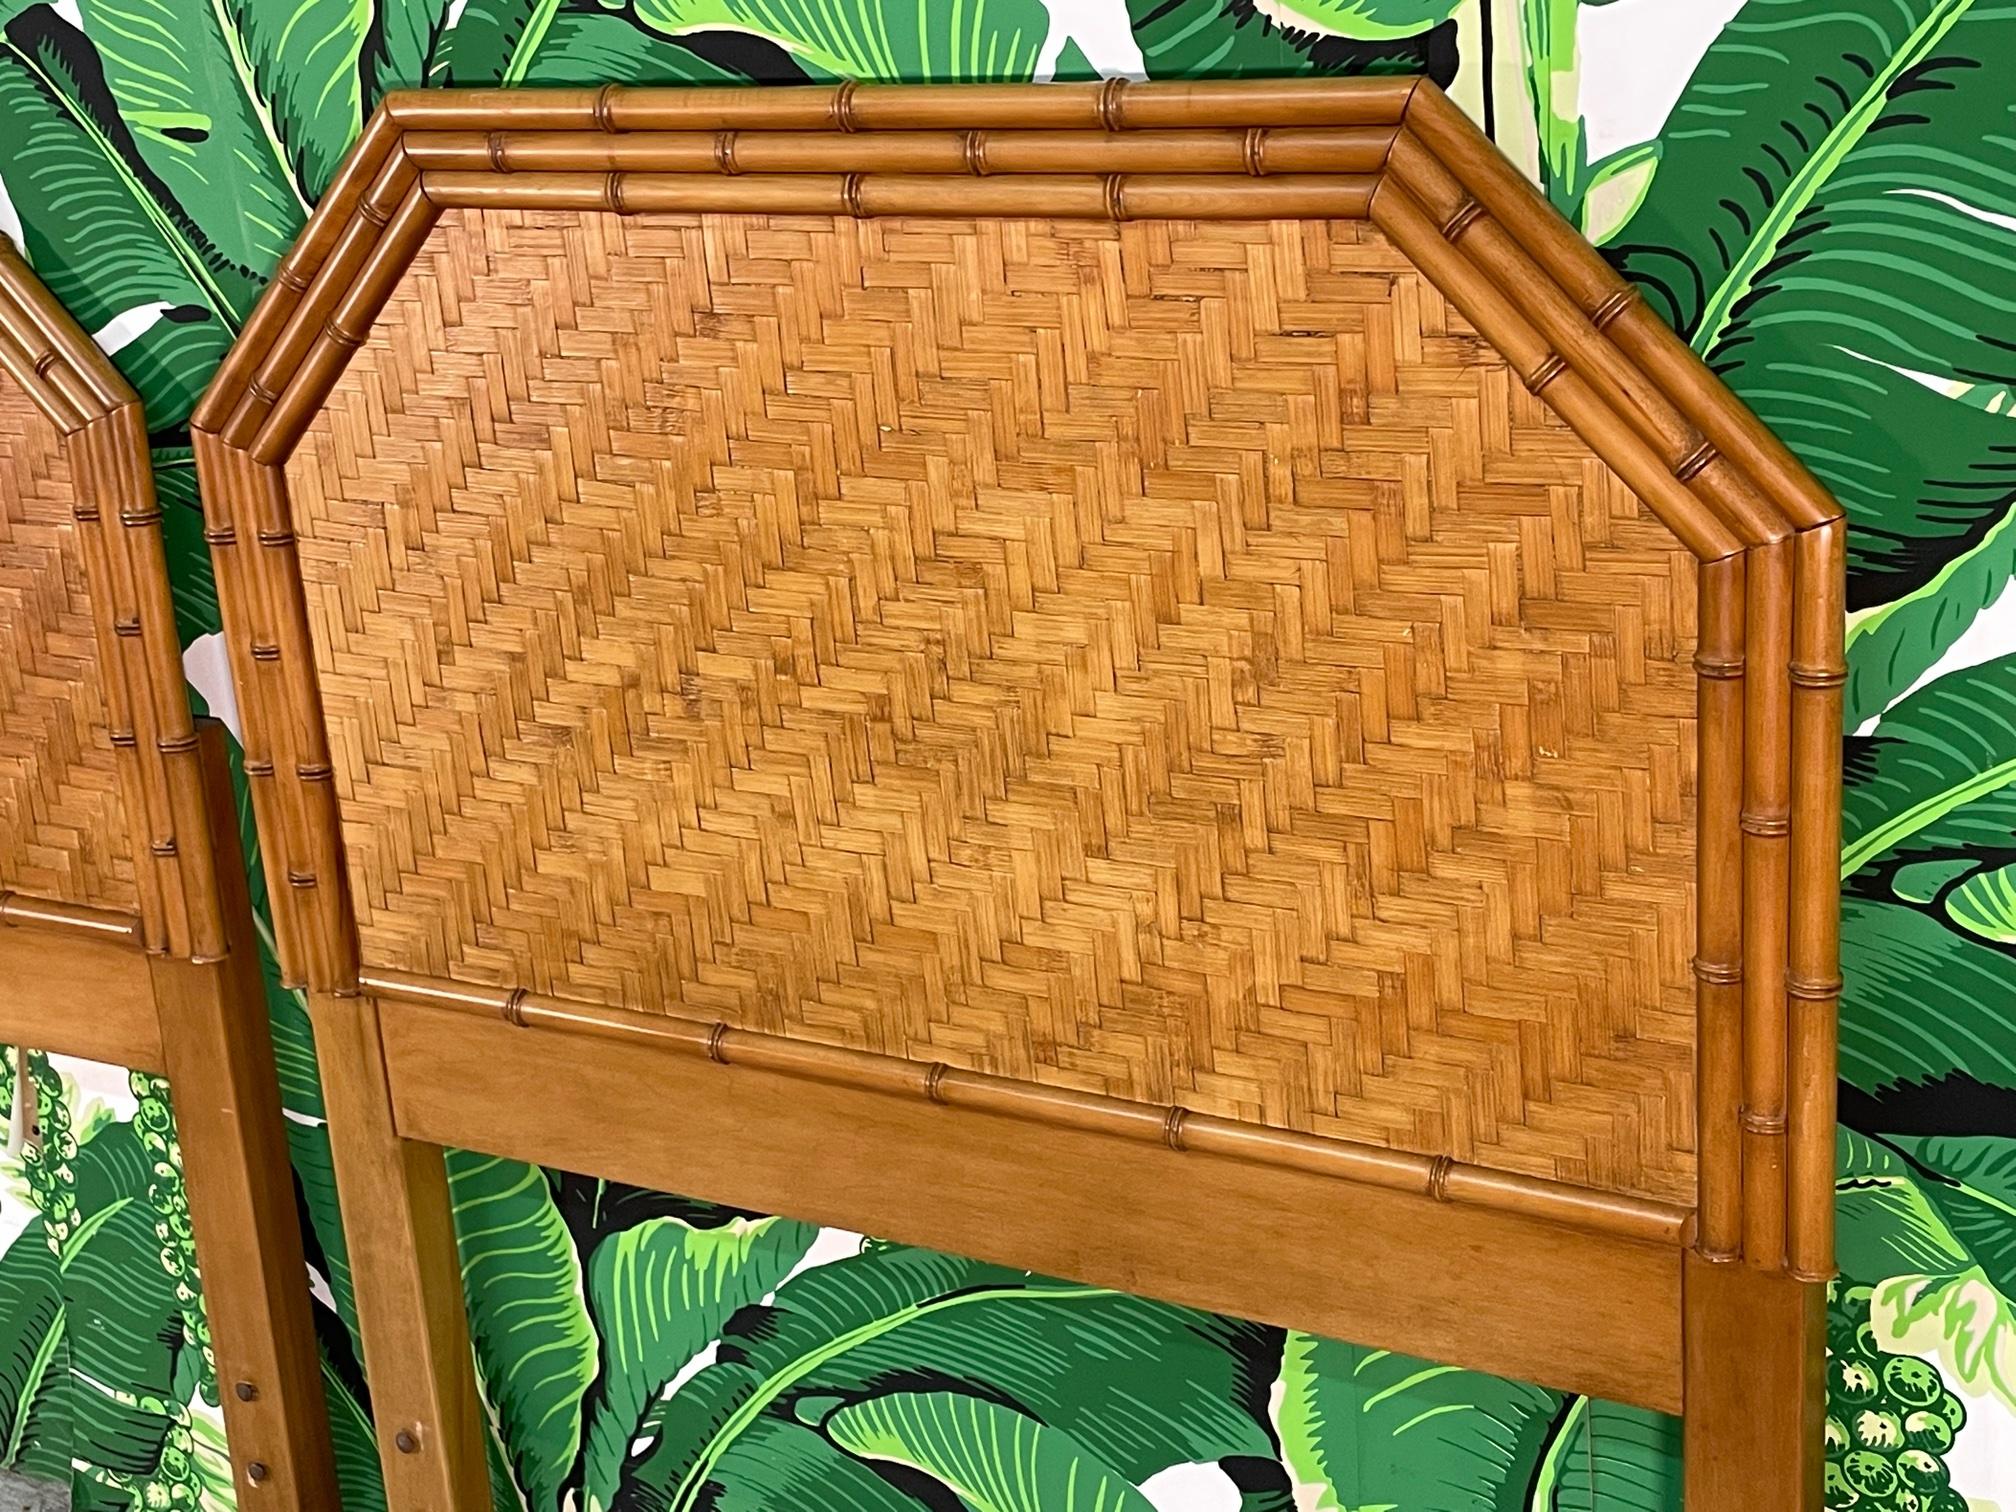 Vintage pair of twin headboards feature faux bamboo detailing and a complete veneer of woven rattan basket weave in a herringbone pattern. The unique rattan veneer gives a look of parquet. Reminiscent of designs by Bielecky Brothers. Warm, rich tone